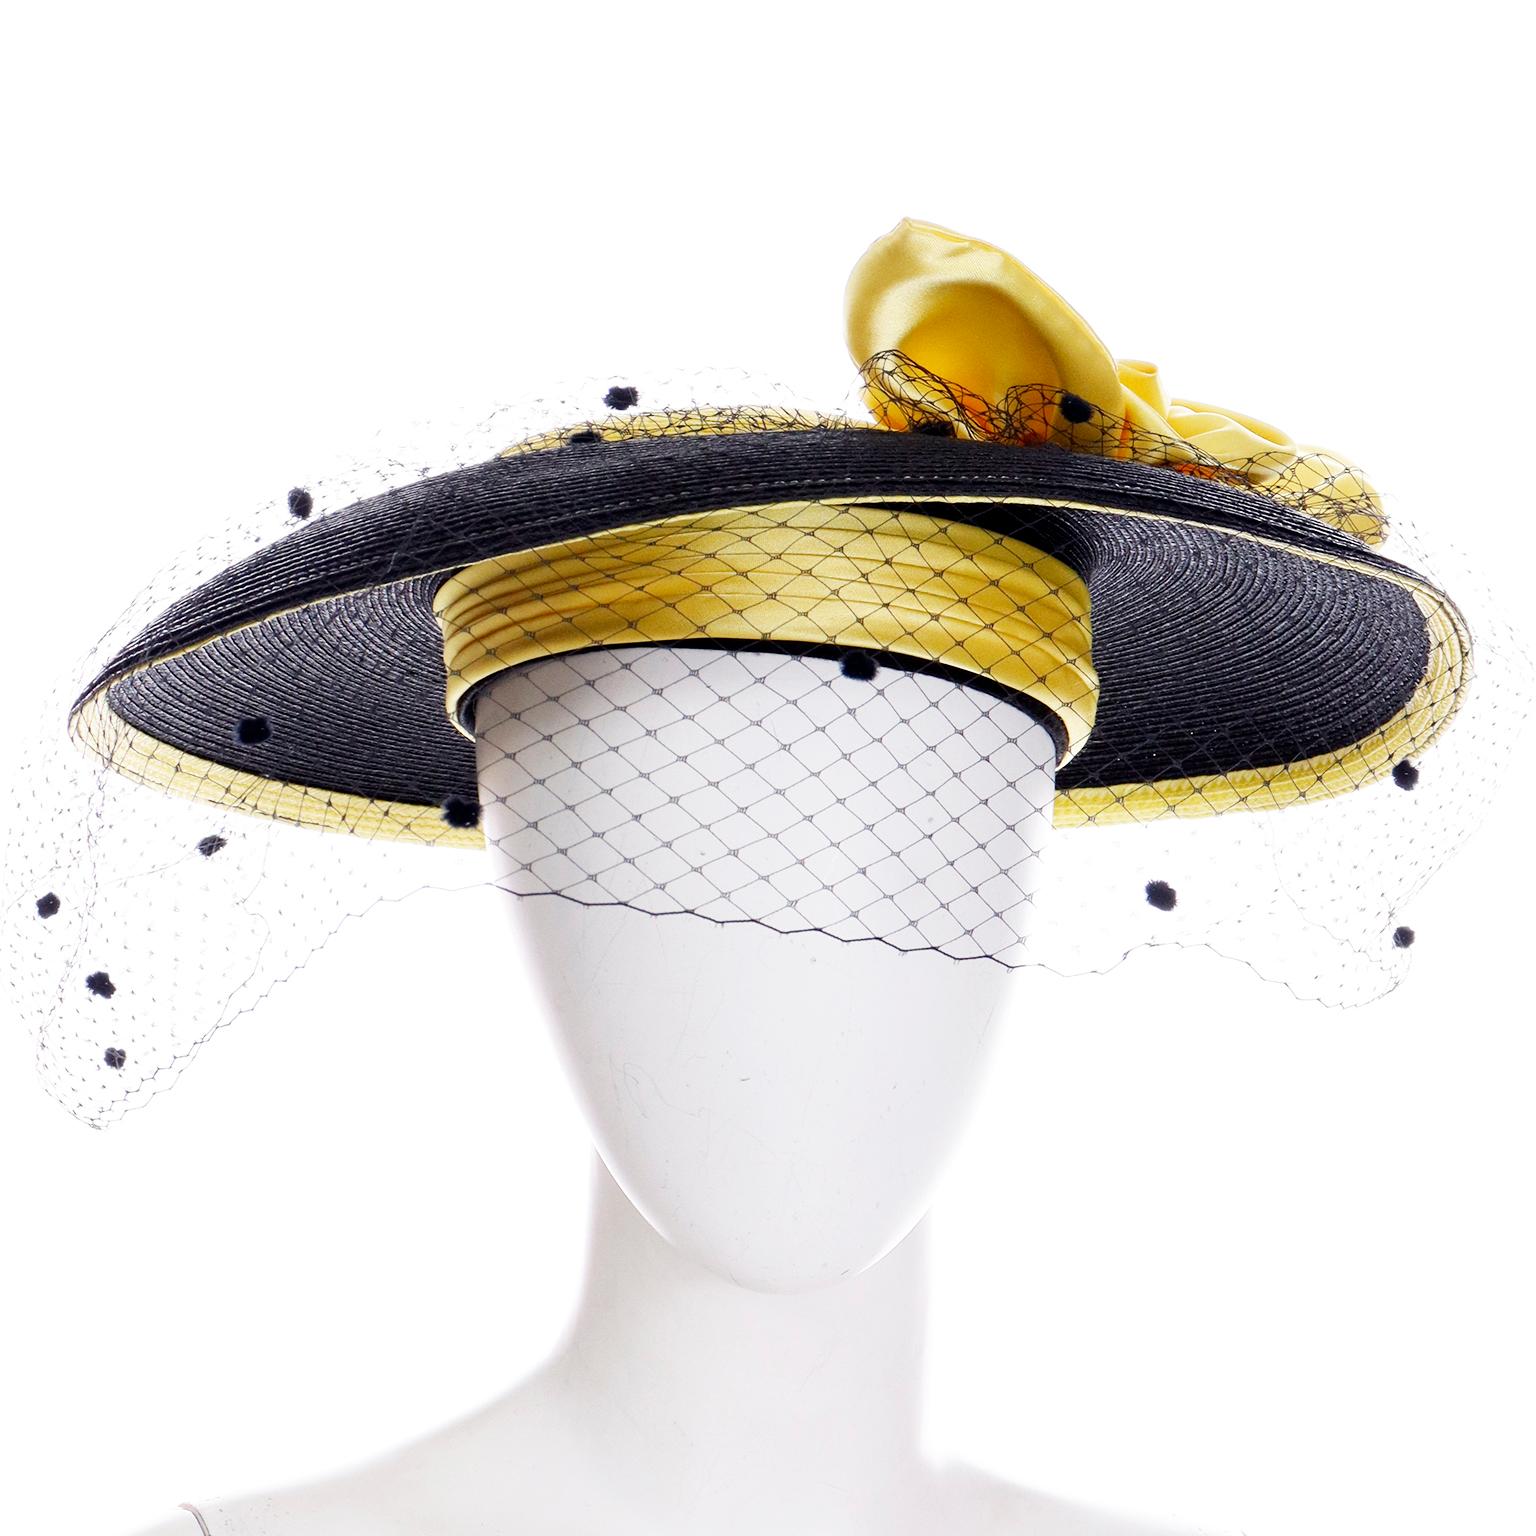 This is a vintage Doris mid century black woven coated straw hat with a yellow crown and yellow satin rose with black polka dot mesh overlay. The brim is slightly longer in length in the front and we love the way the hat fits! This hat was acquired